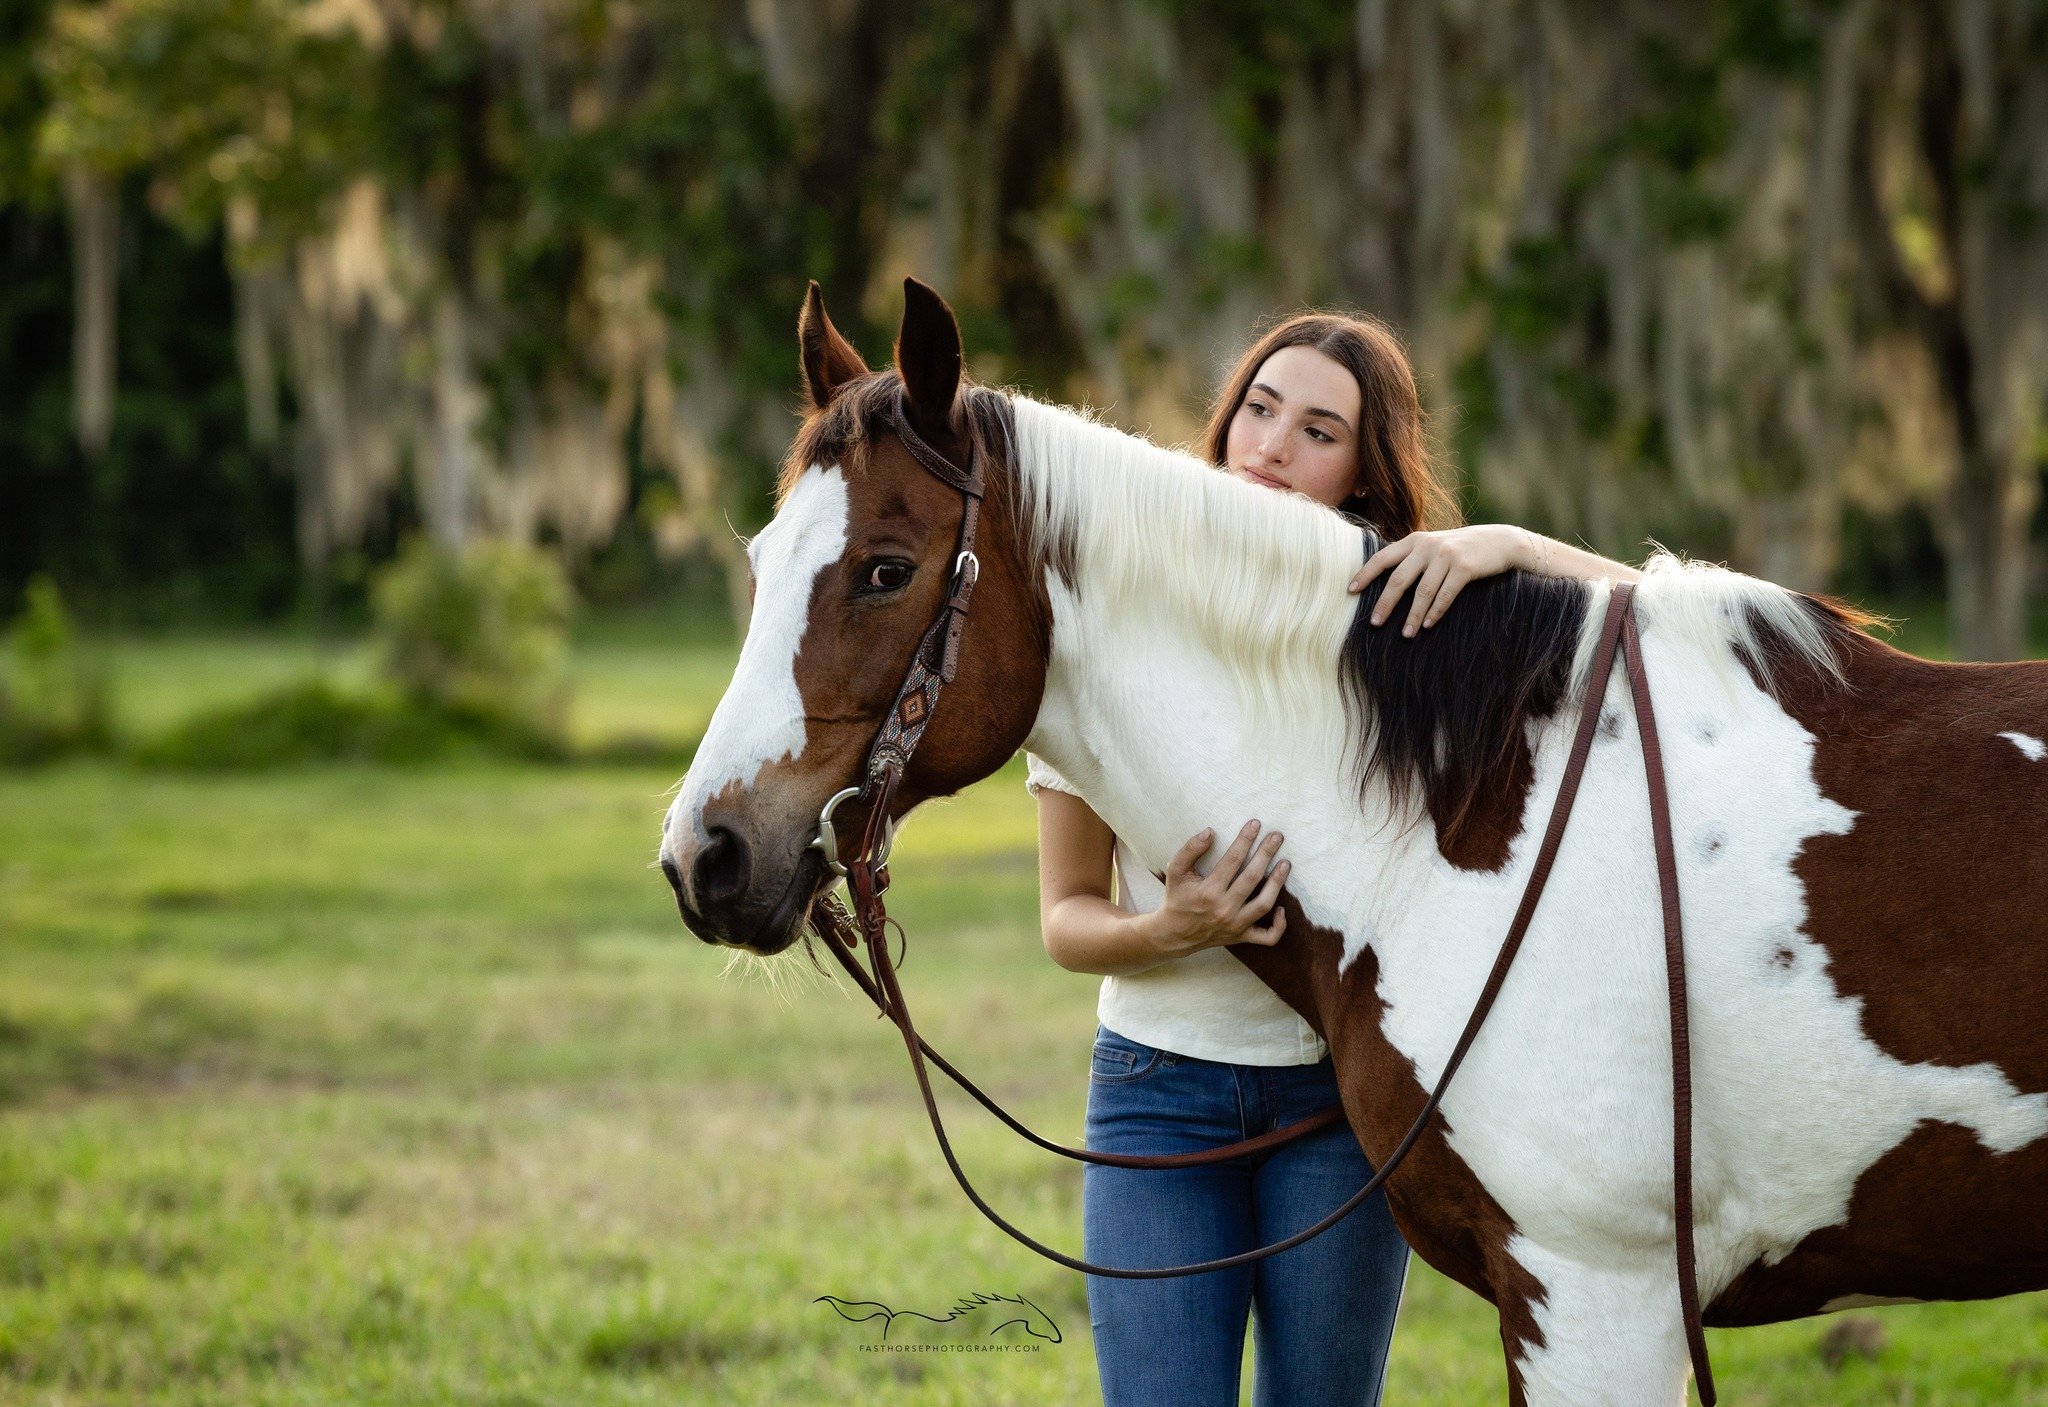 There is nothing like a relaxed session with two of your favorite horses! Sometimes your blue jeans and boots and a little bareback horse riding is all that's required to enjoy the very last light at the end of a day. 

Pictured: Vanessa, Zippa &amp;